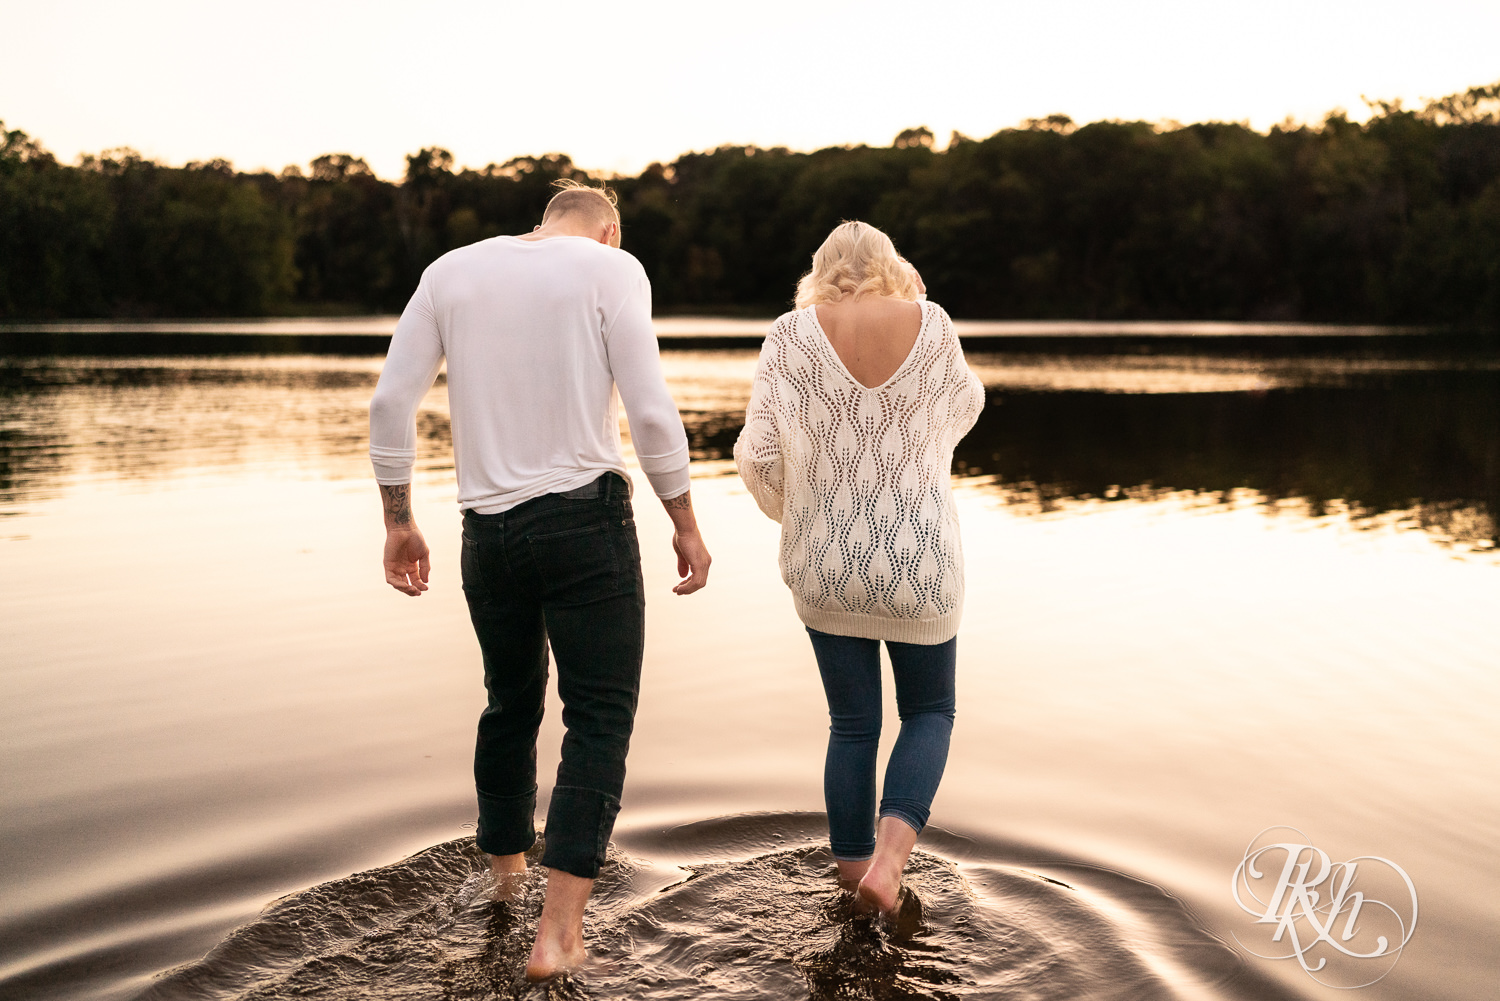 Blond woman and man in white shirts and jeans walk in the lake at Lebanon Hills Regional Park in Eagan, Minnesota.